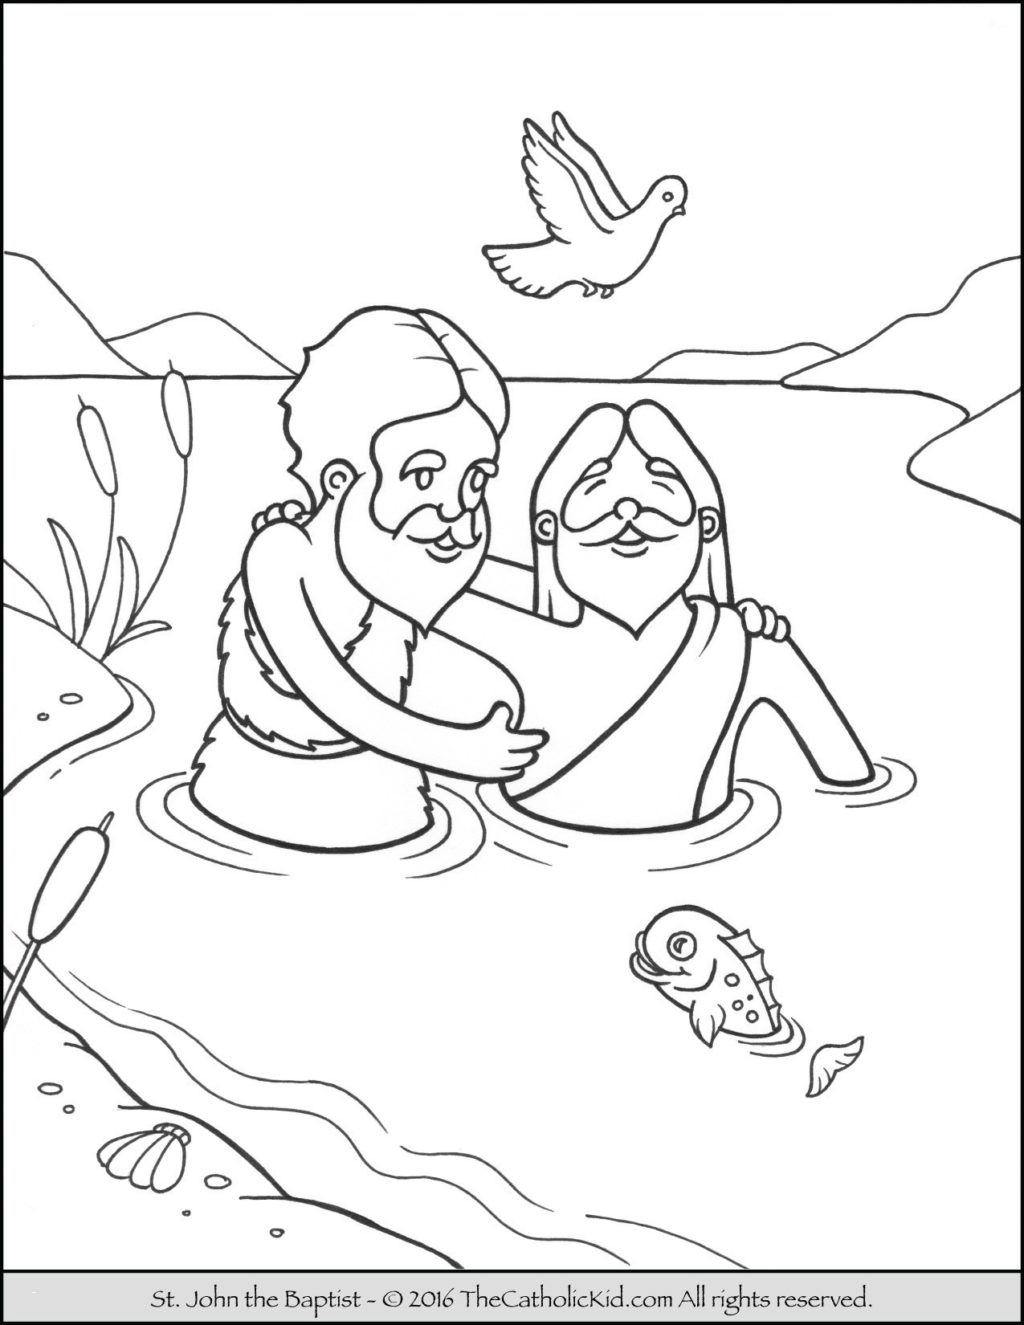 Coloring Pages : Jesus Coloring Pages For Kids Free To Print Happy ...